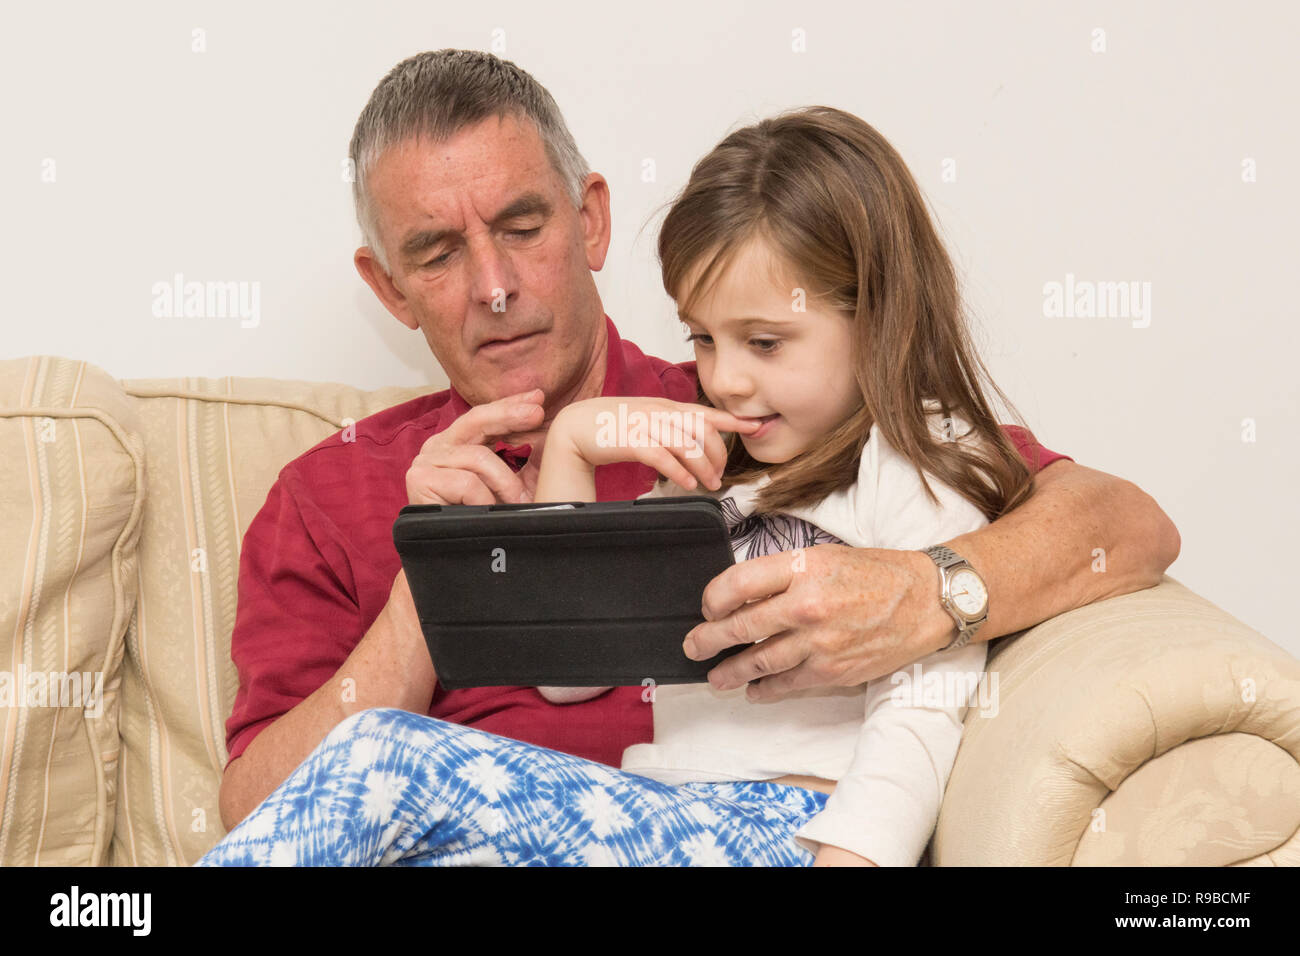 granddaughter  helping grandfather with tablet, electronic device, social media, modern technology. girl helping ageing father with iPad, tablet. Stock Photo